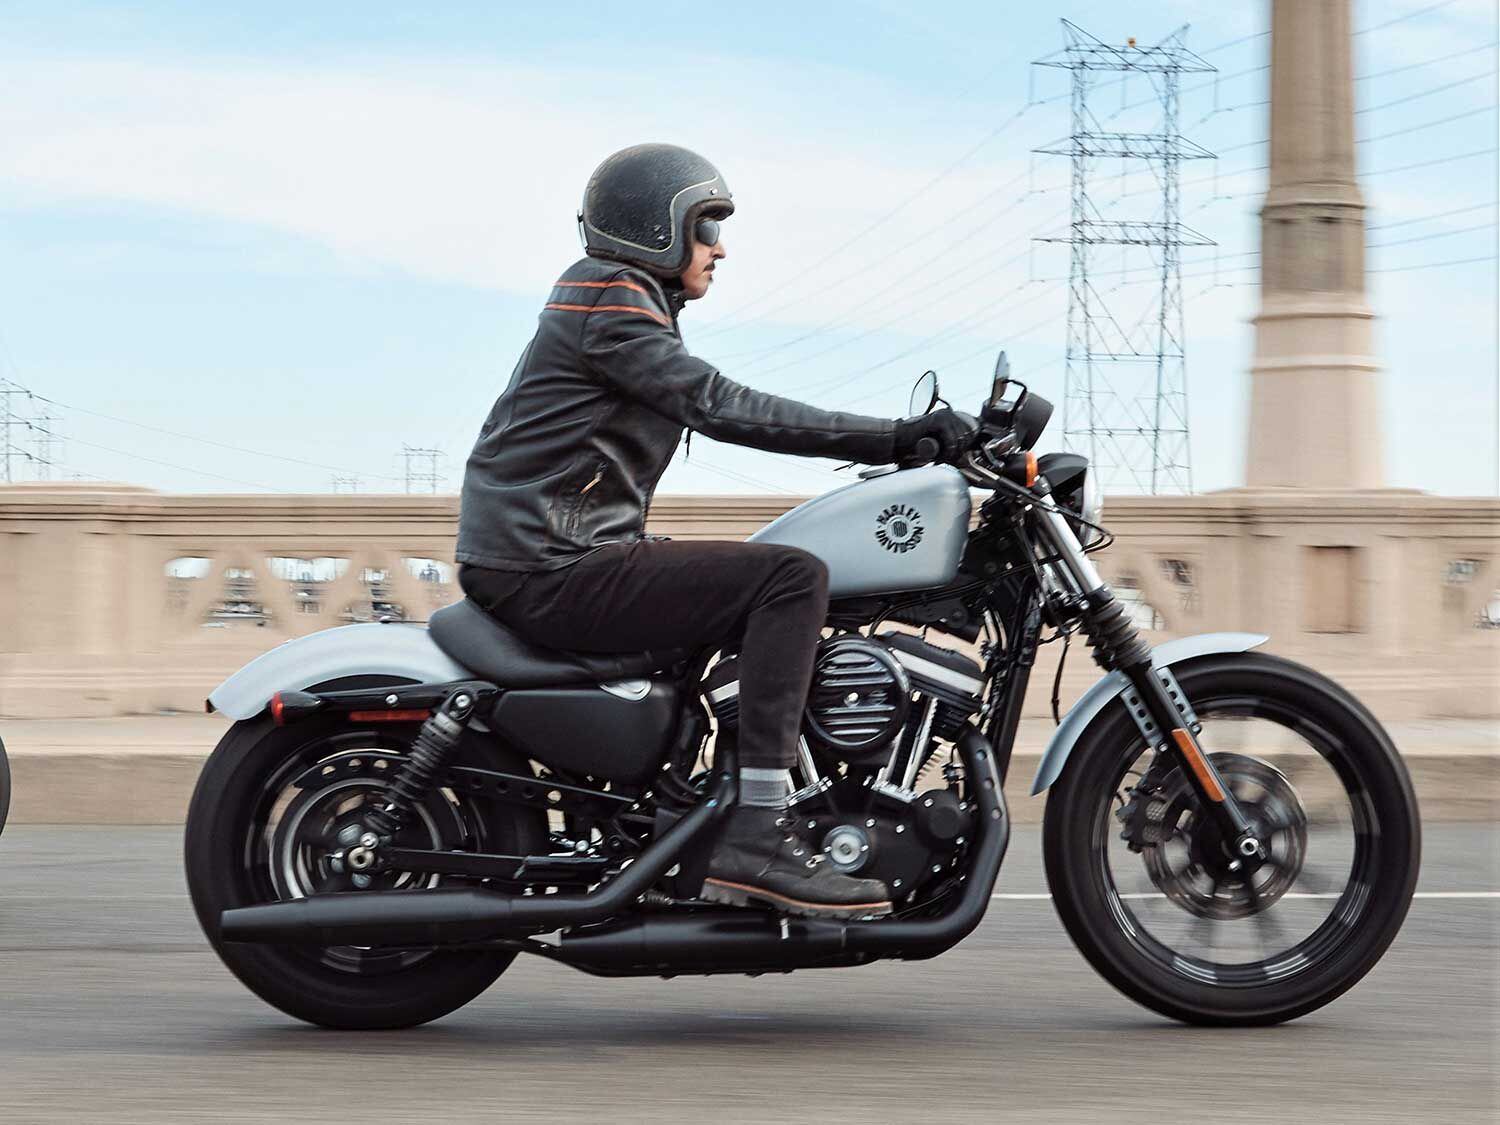 Few brands have name recognition like Harley’s Sportster, which over the decades has remained a fan (and customer) favorite of seasoned riders newbies and customizers alike.